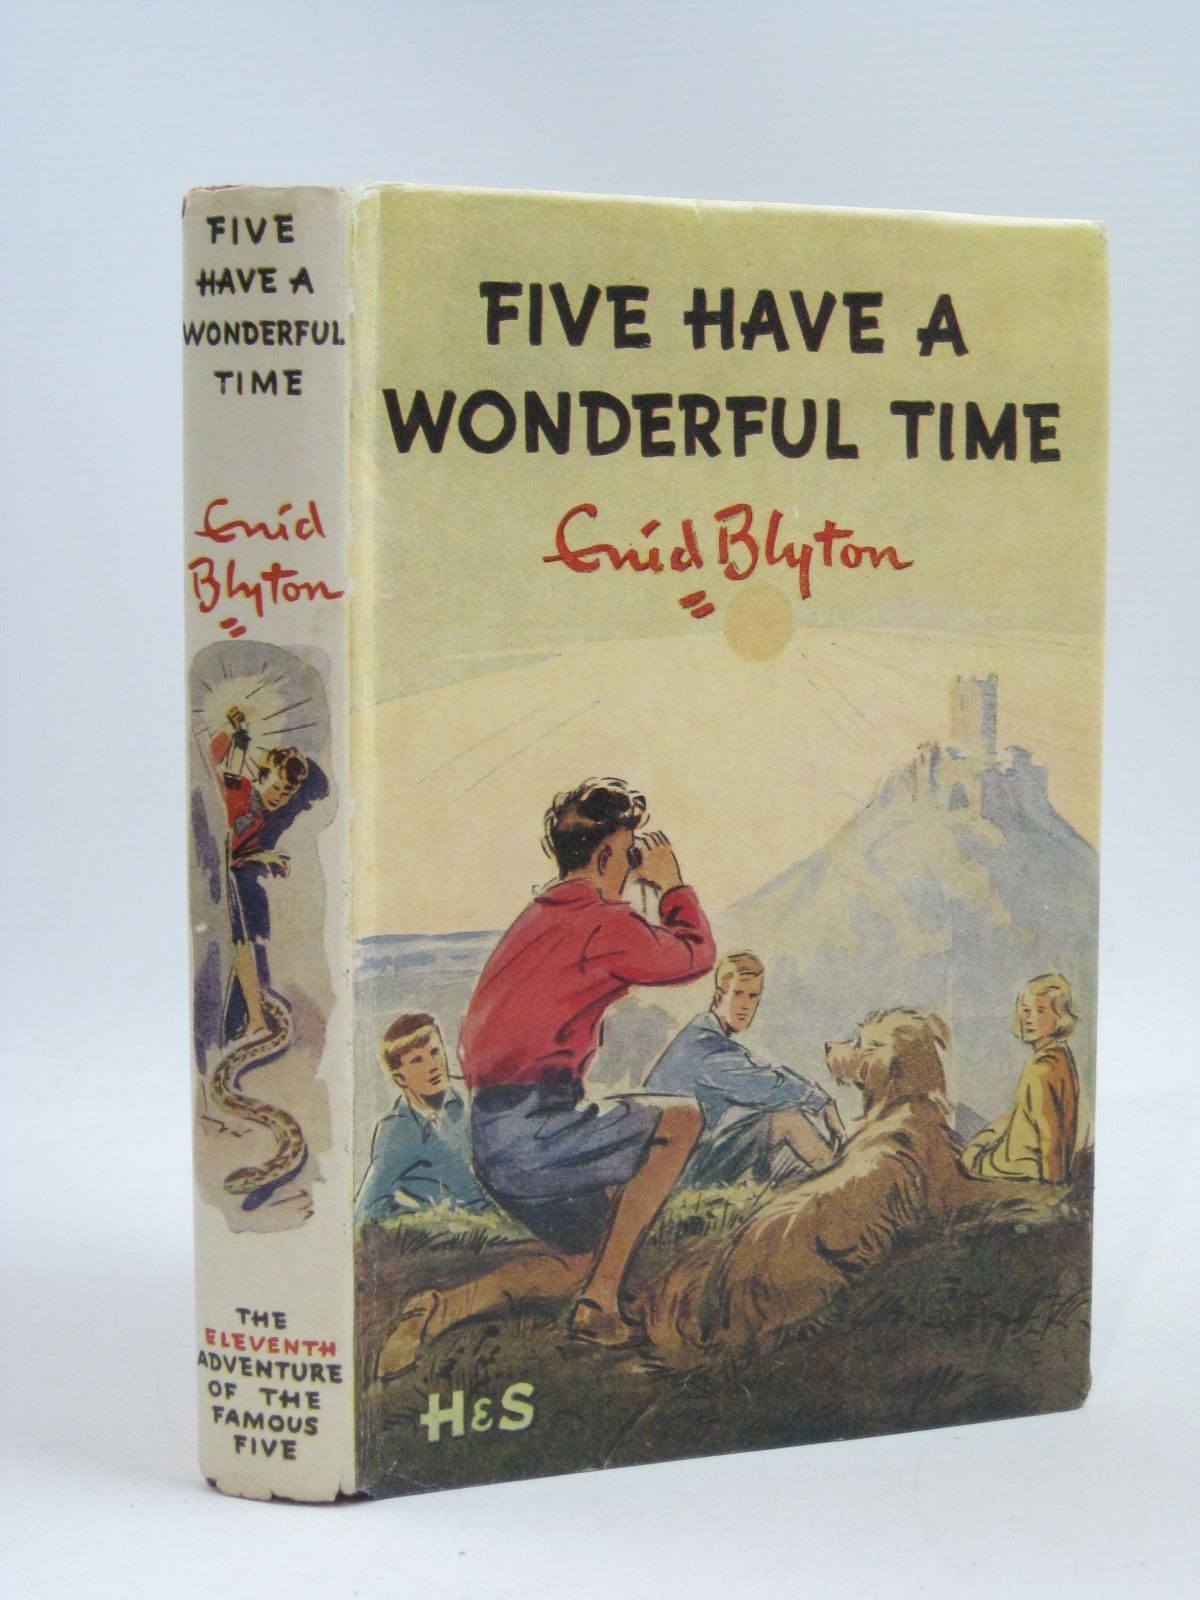 Cover of FIVE HAVE A WONDERFUL TIME by Enid Blyton